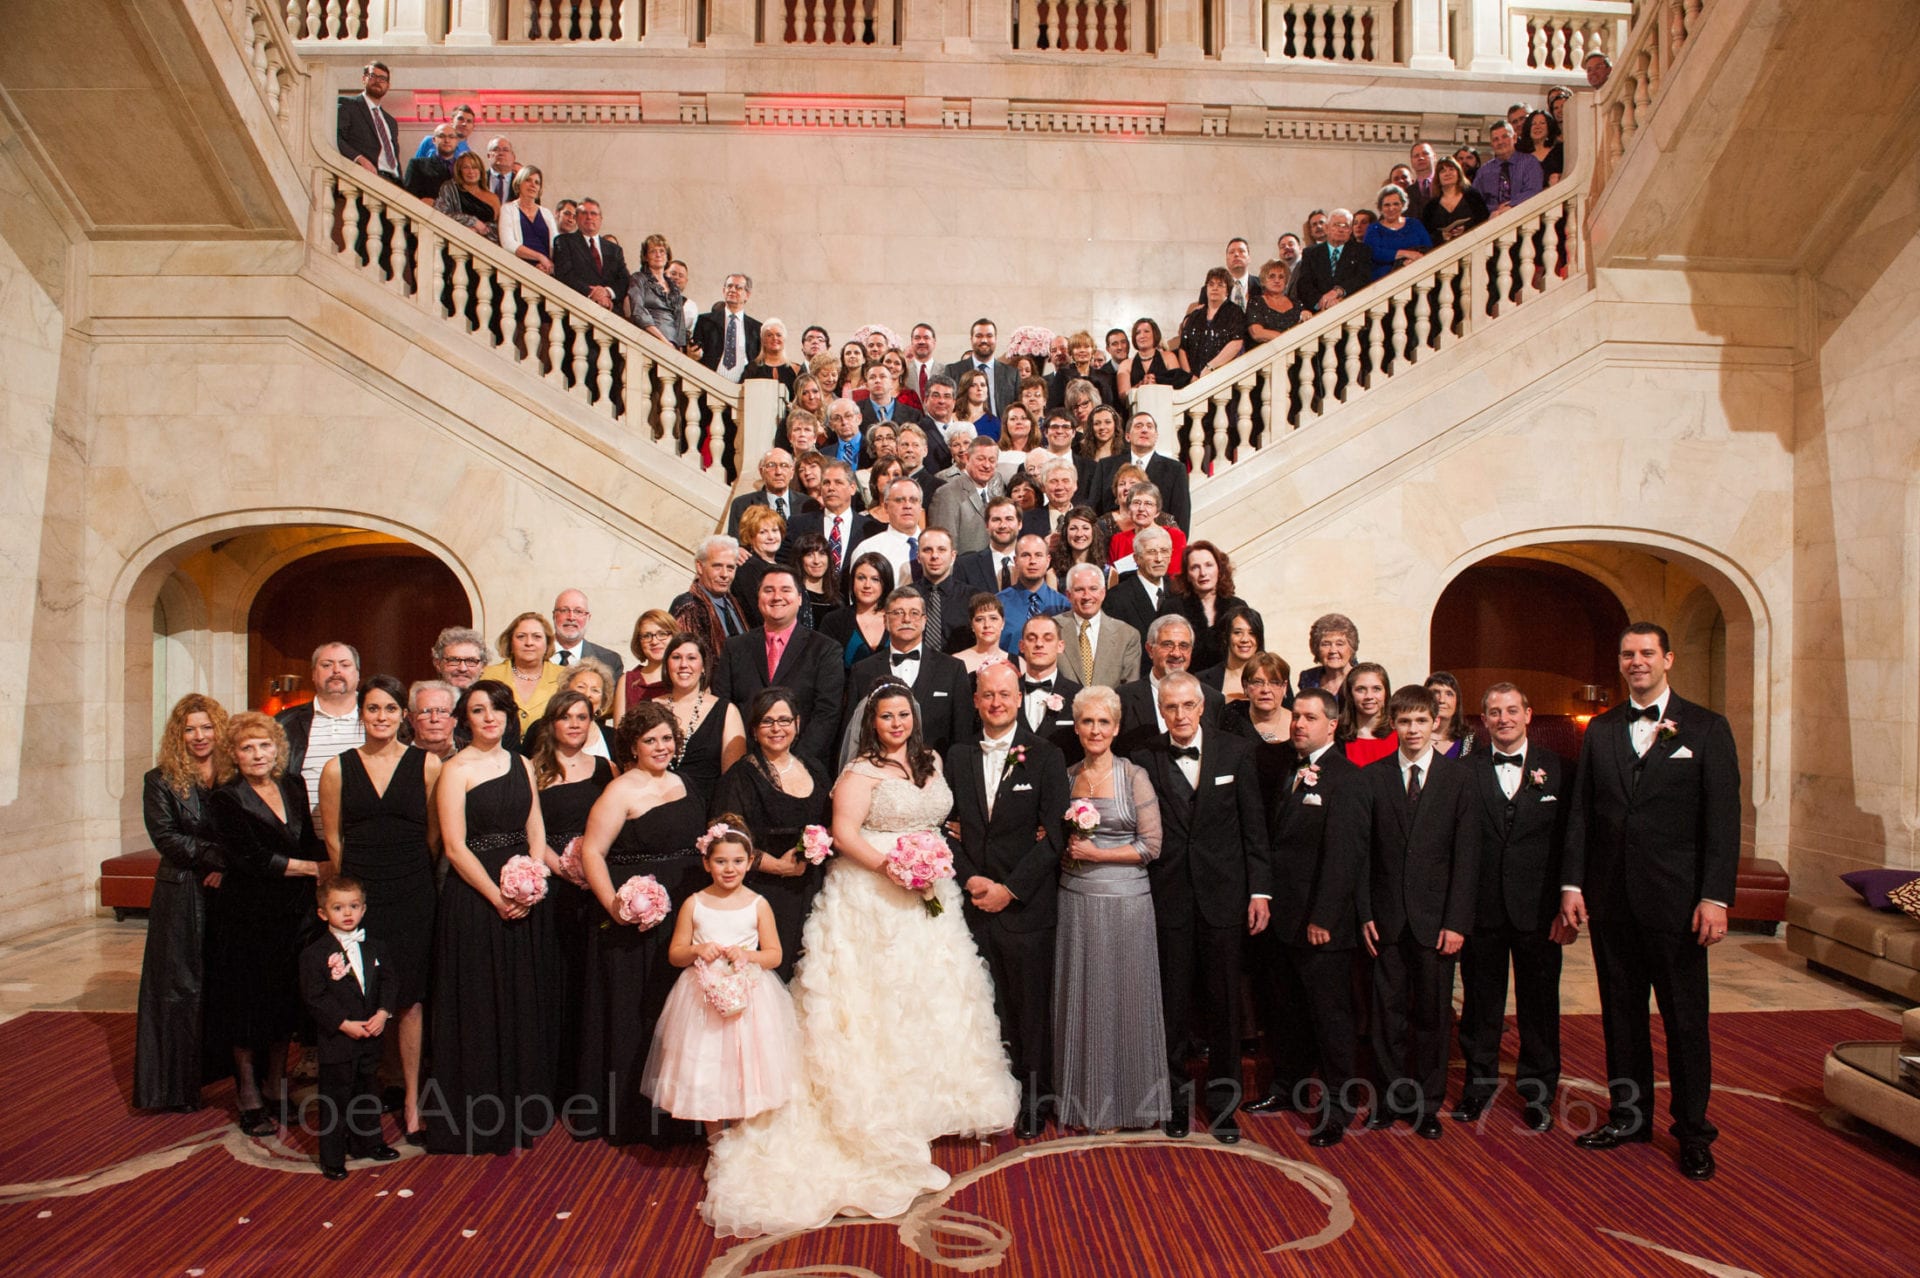 the wedding party and guests stand on a red carpeted staircase